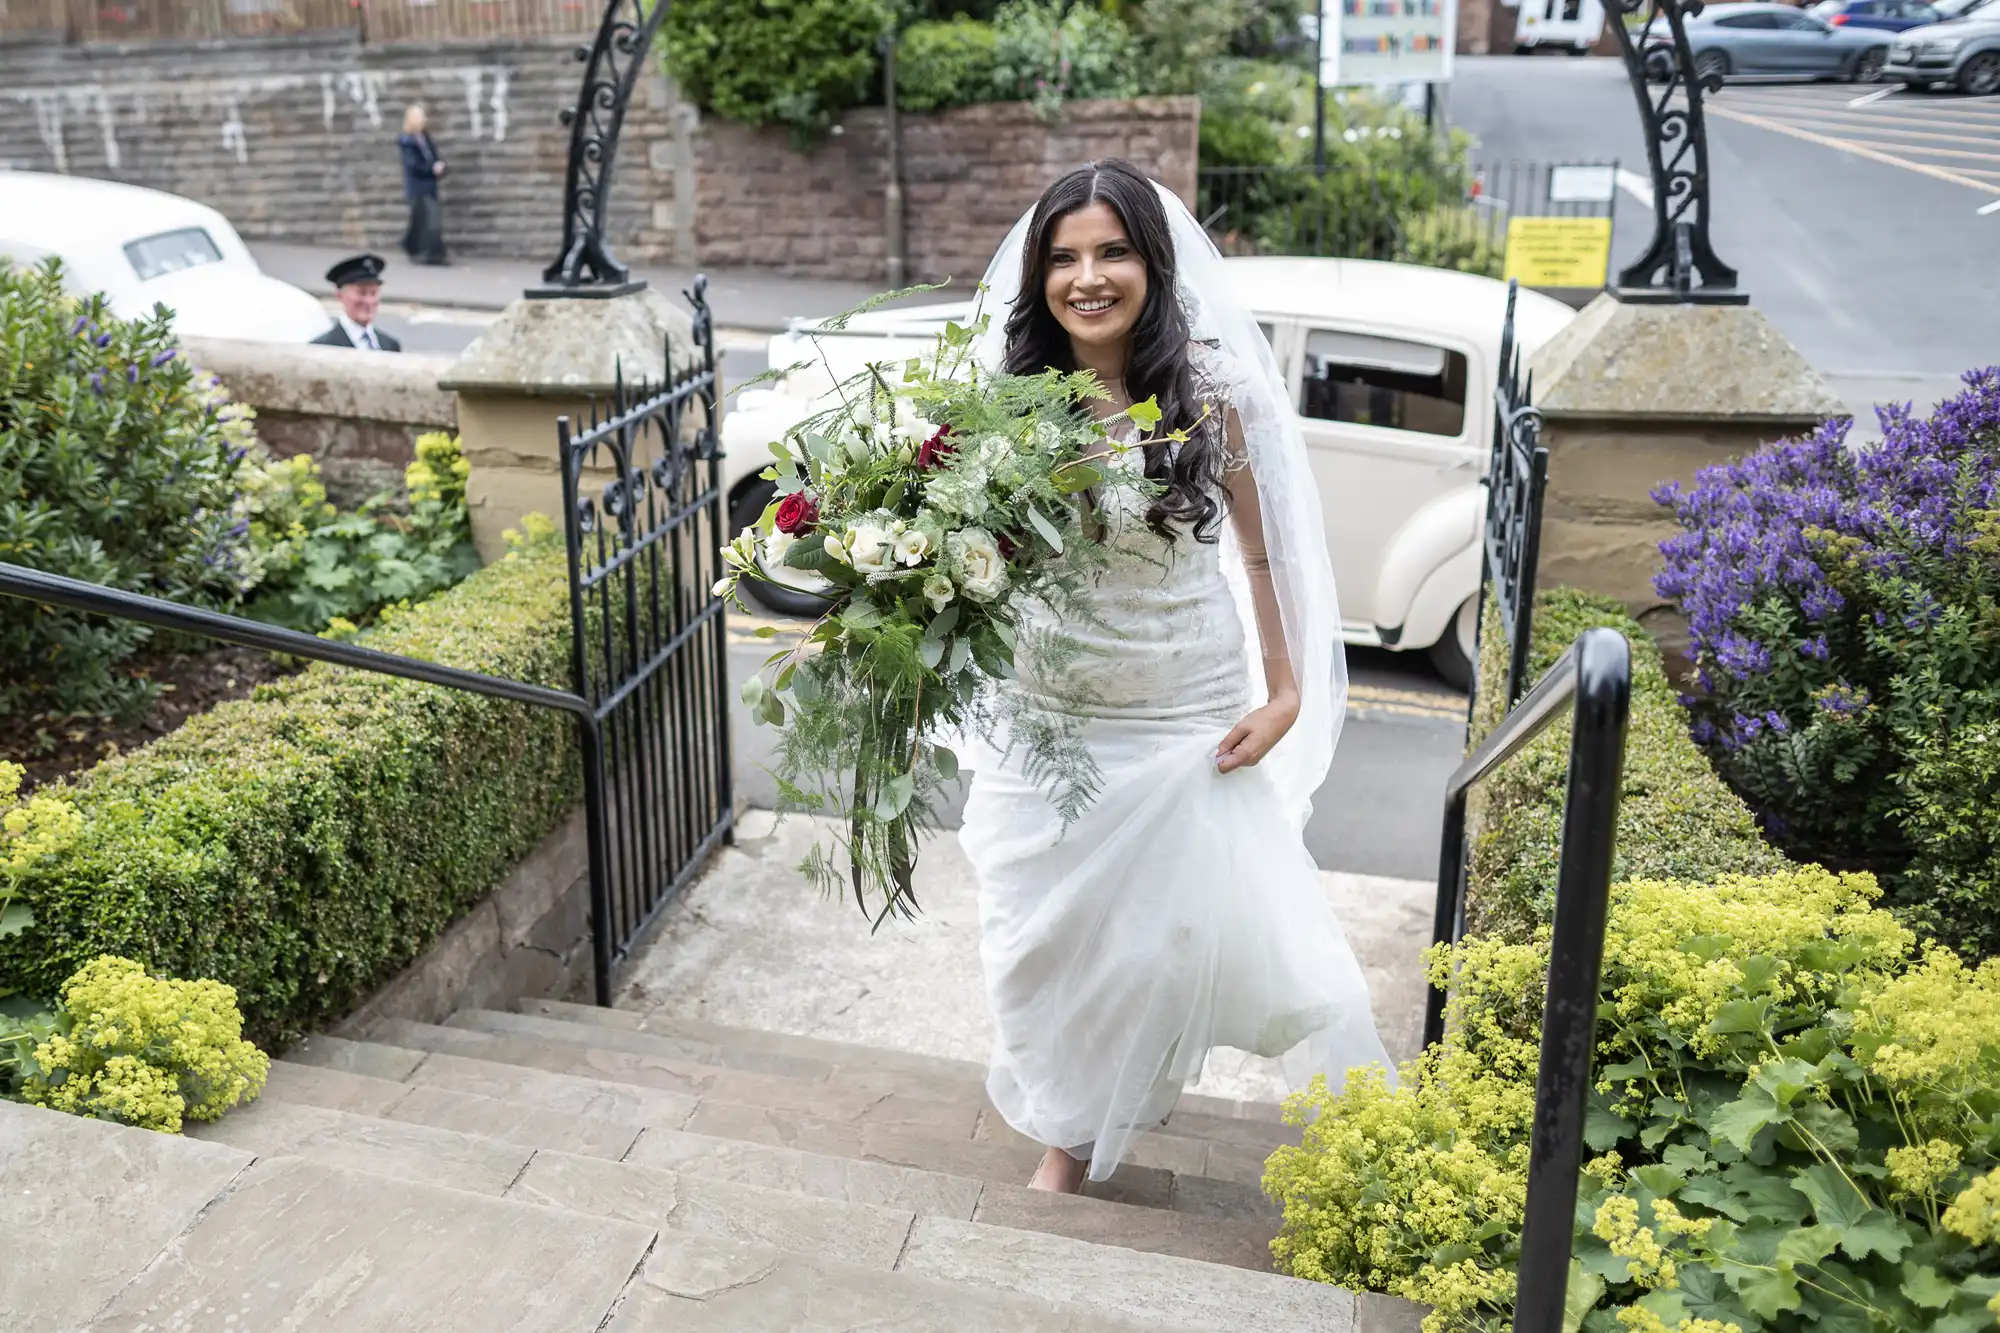 A bride smiles while walking up stone steps, holding a large bouquet, with a vintage car and chauffeur in the background.